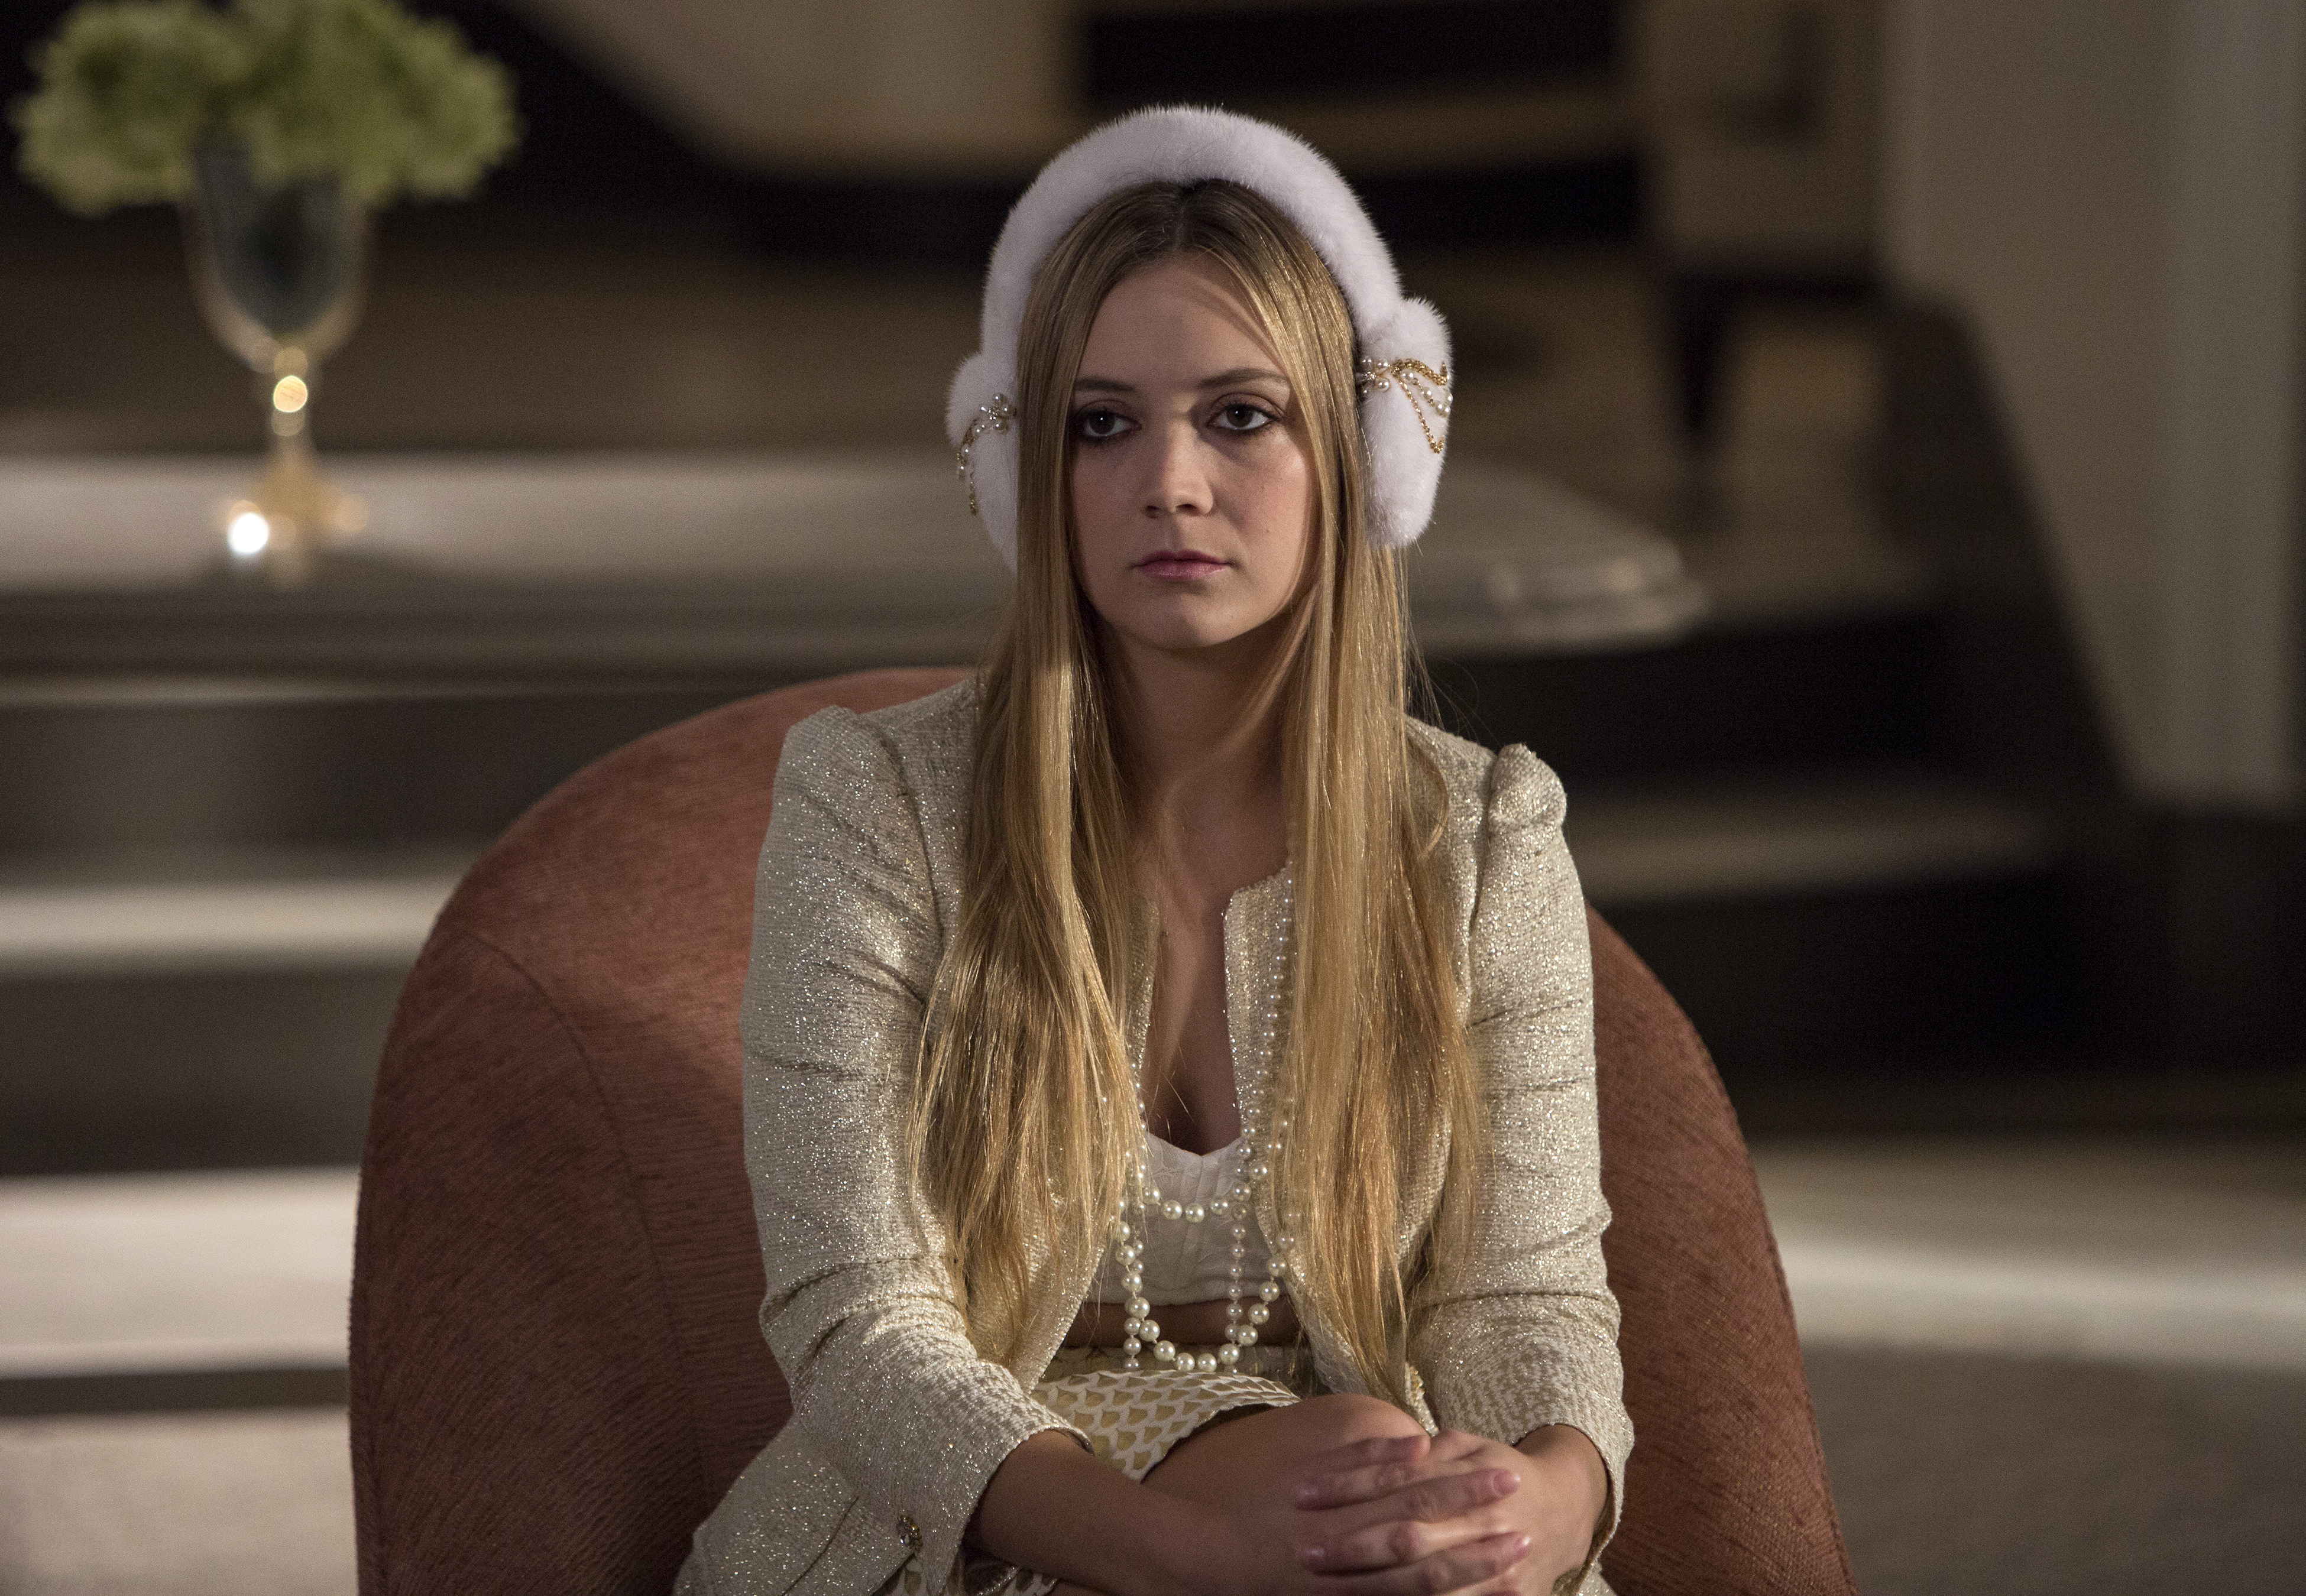 WornOnTV Chanel 3s purple ruffled crop top and pink fur coat on Scream  Queens  Billie Lourd  Clothes and Wardrobe from TV